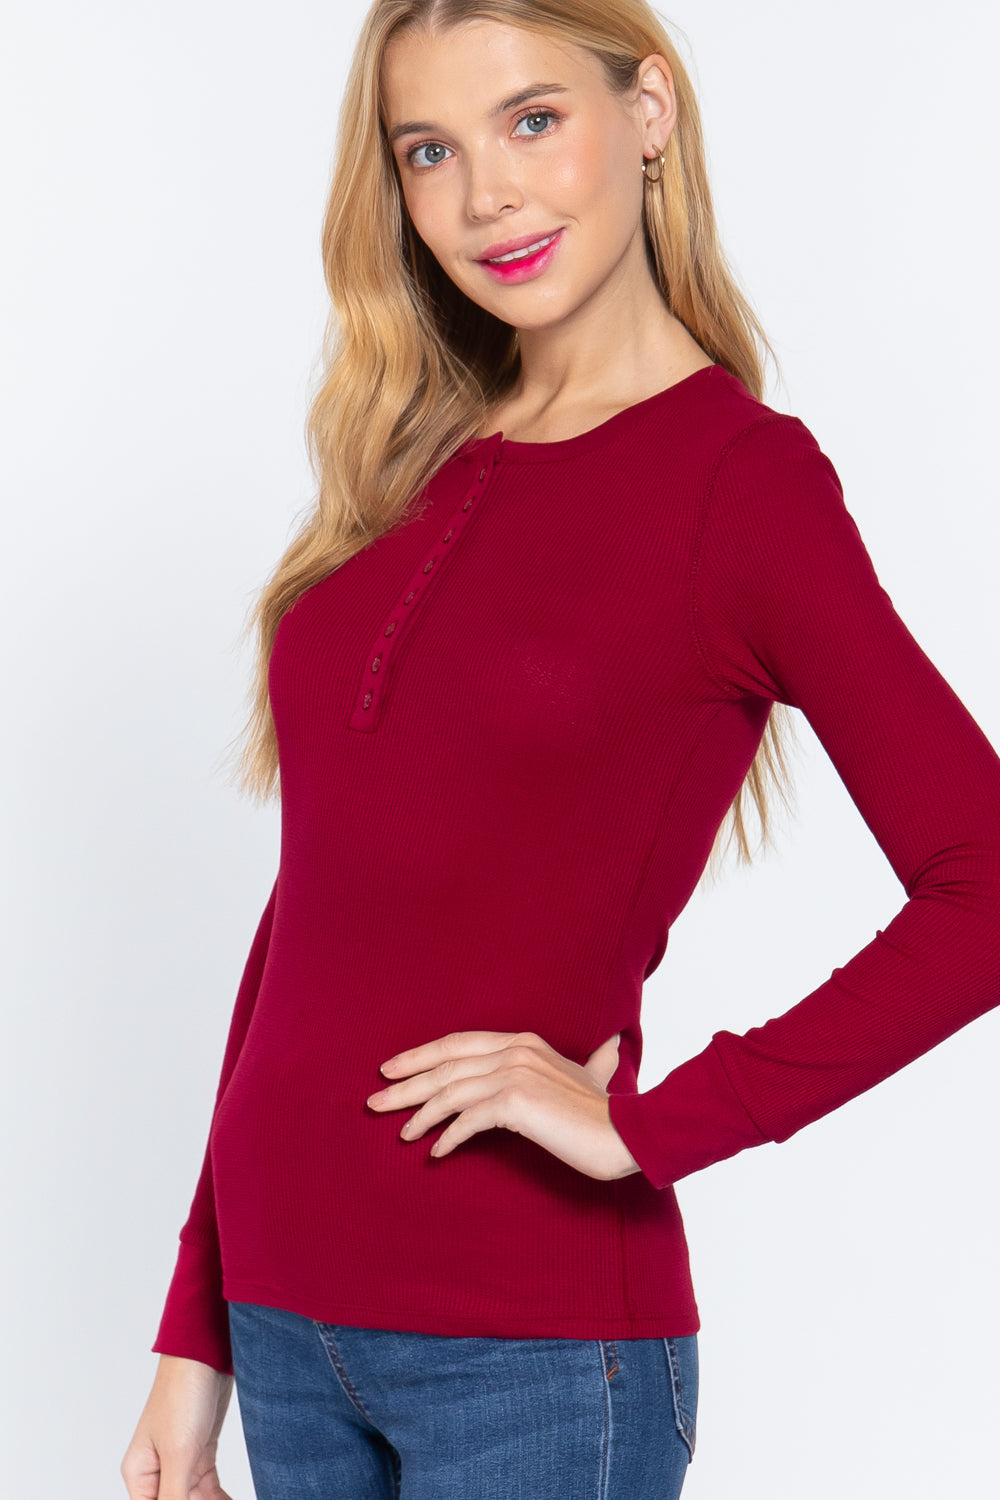 Wine Red Long Sleeve Waffle Knit Stretch Cotton Henley Thermal Top Shirt Shirts & Tops jehouze 